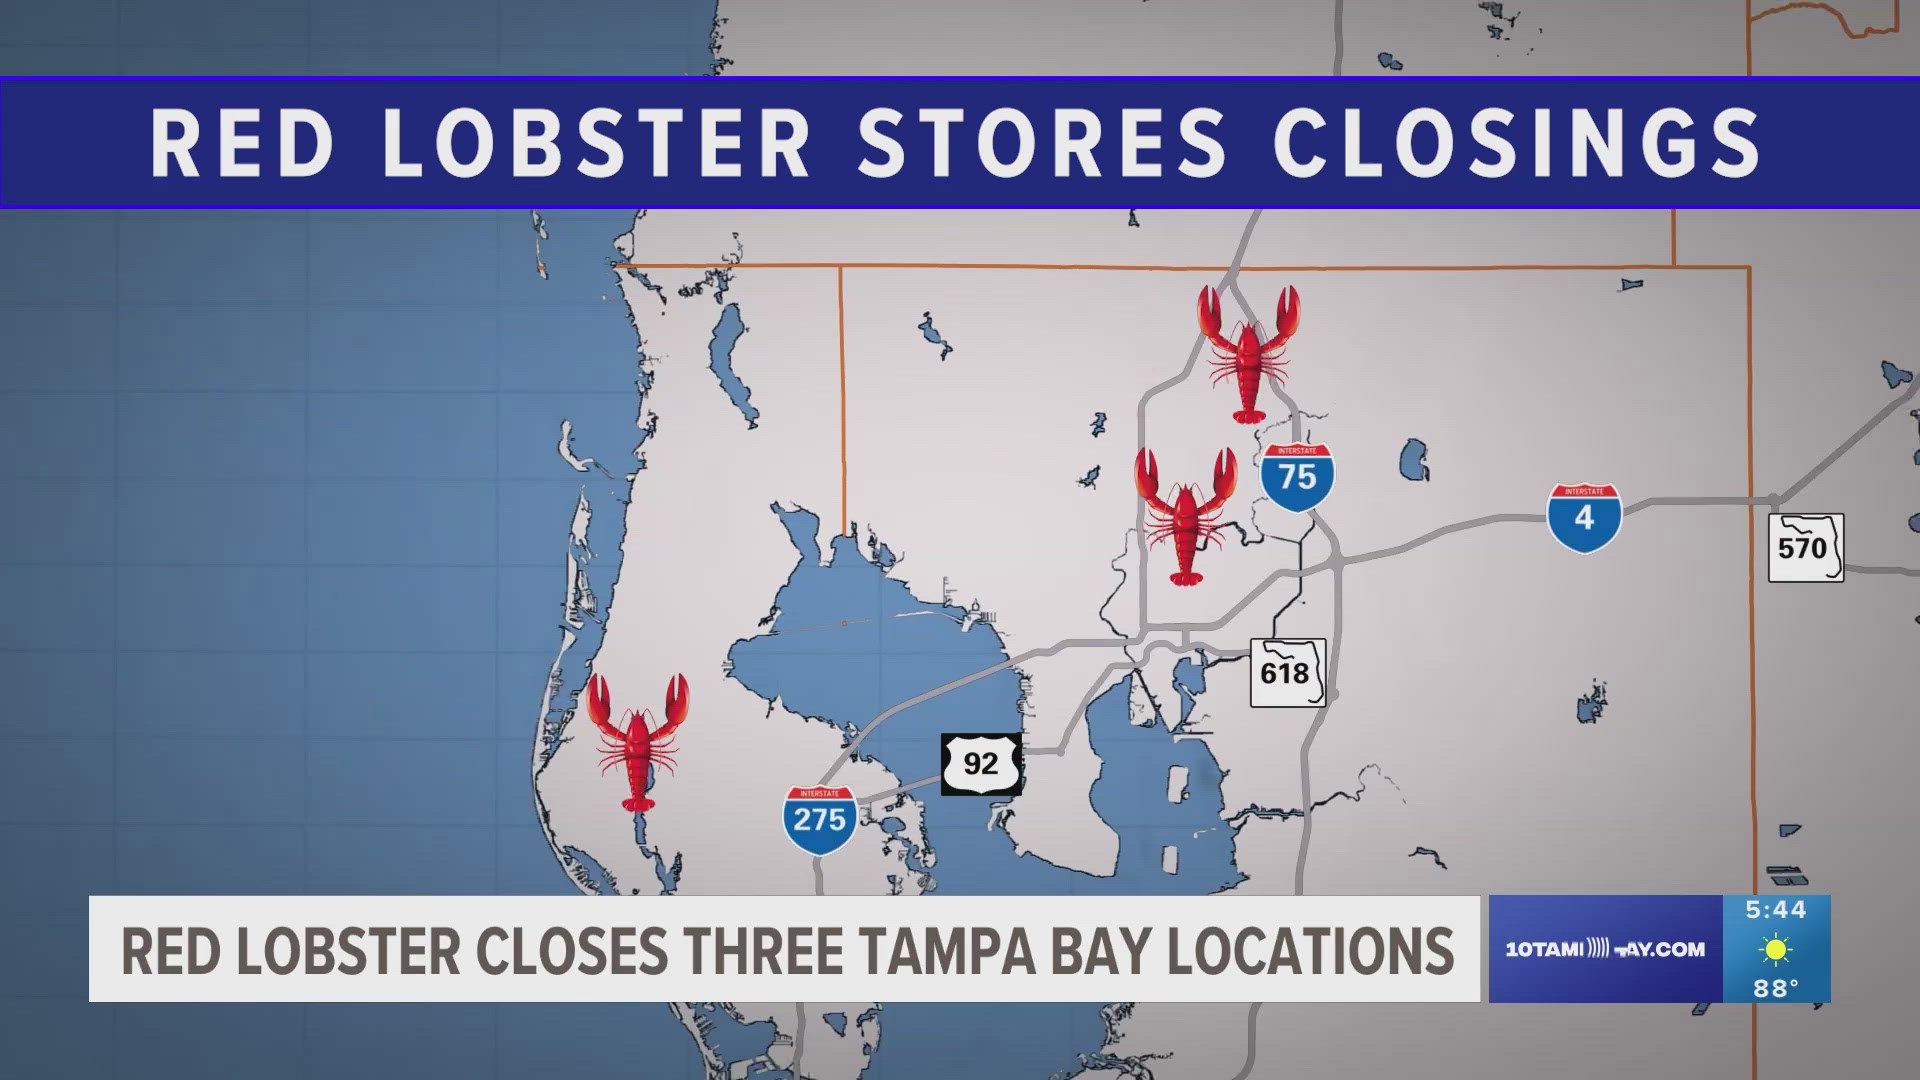 The first-ever Red Lobster location opened in 1968 in Lakeland.